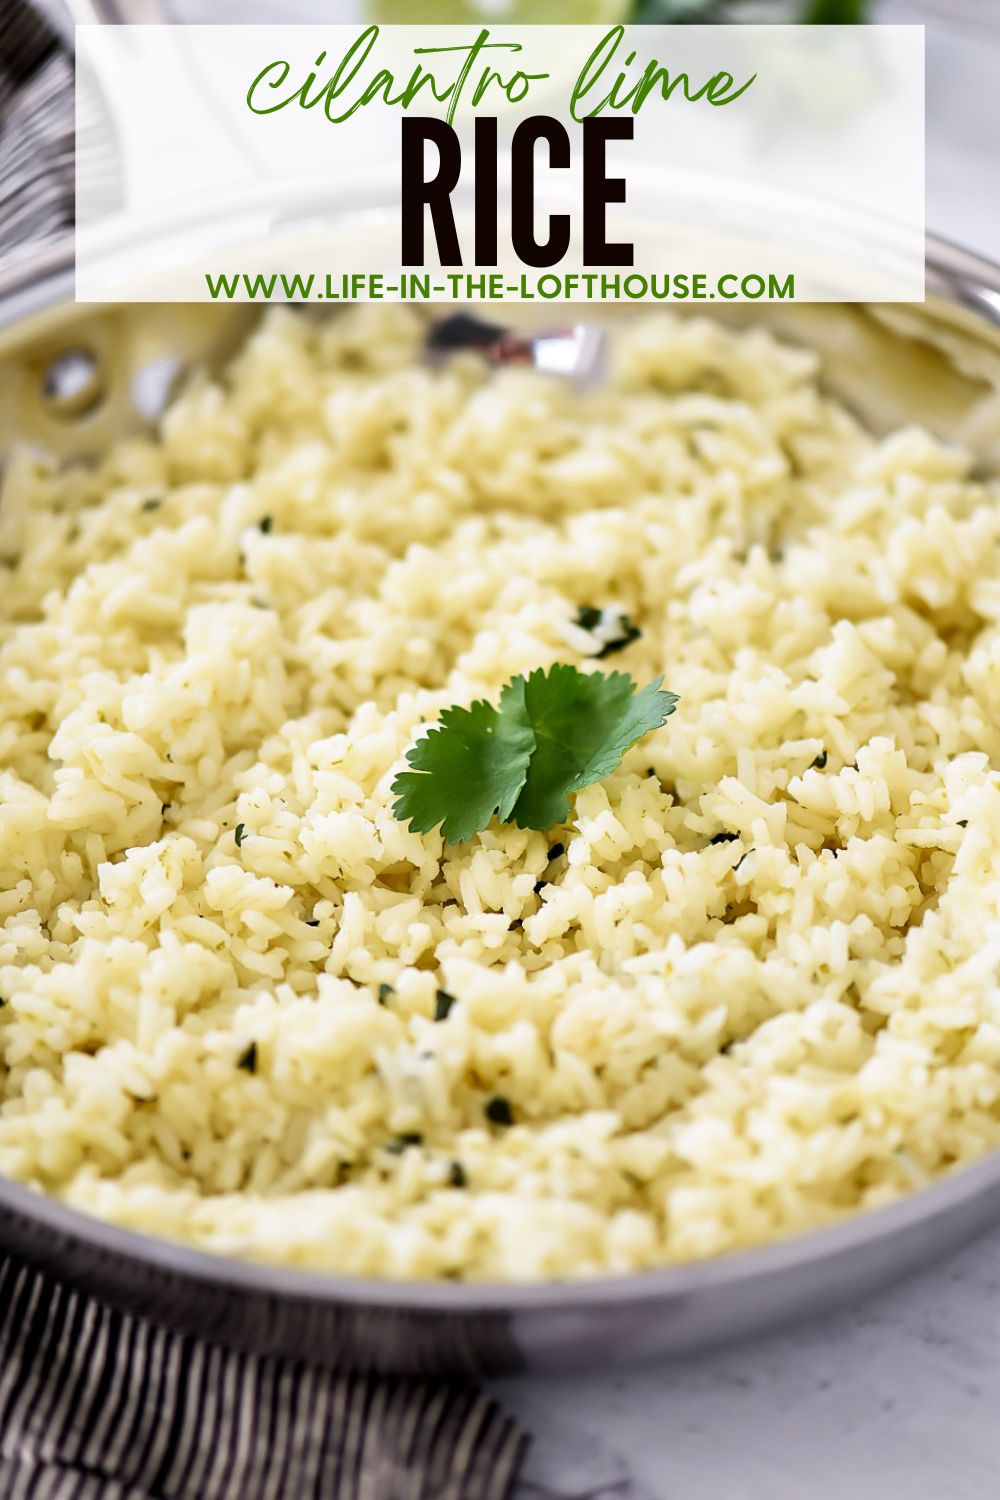 Cilantro Lime Rice is delicious rice with hints of cilantro and lime flavors. Life-in-the-Lofthouse.com